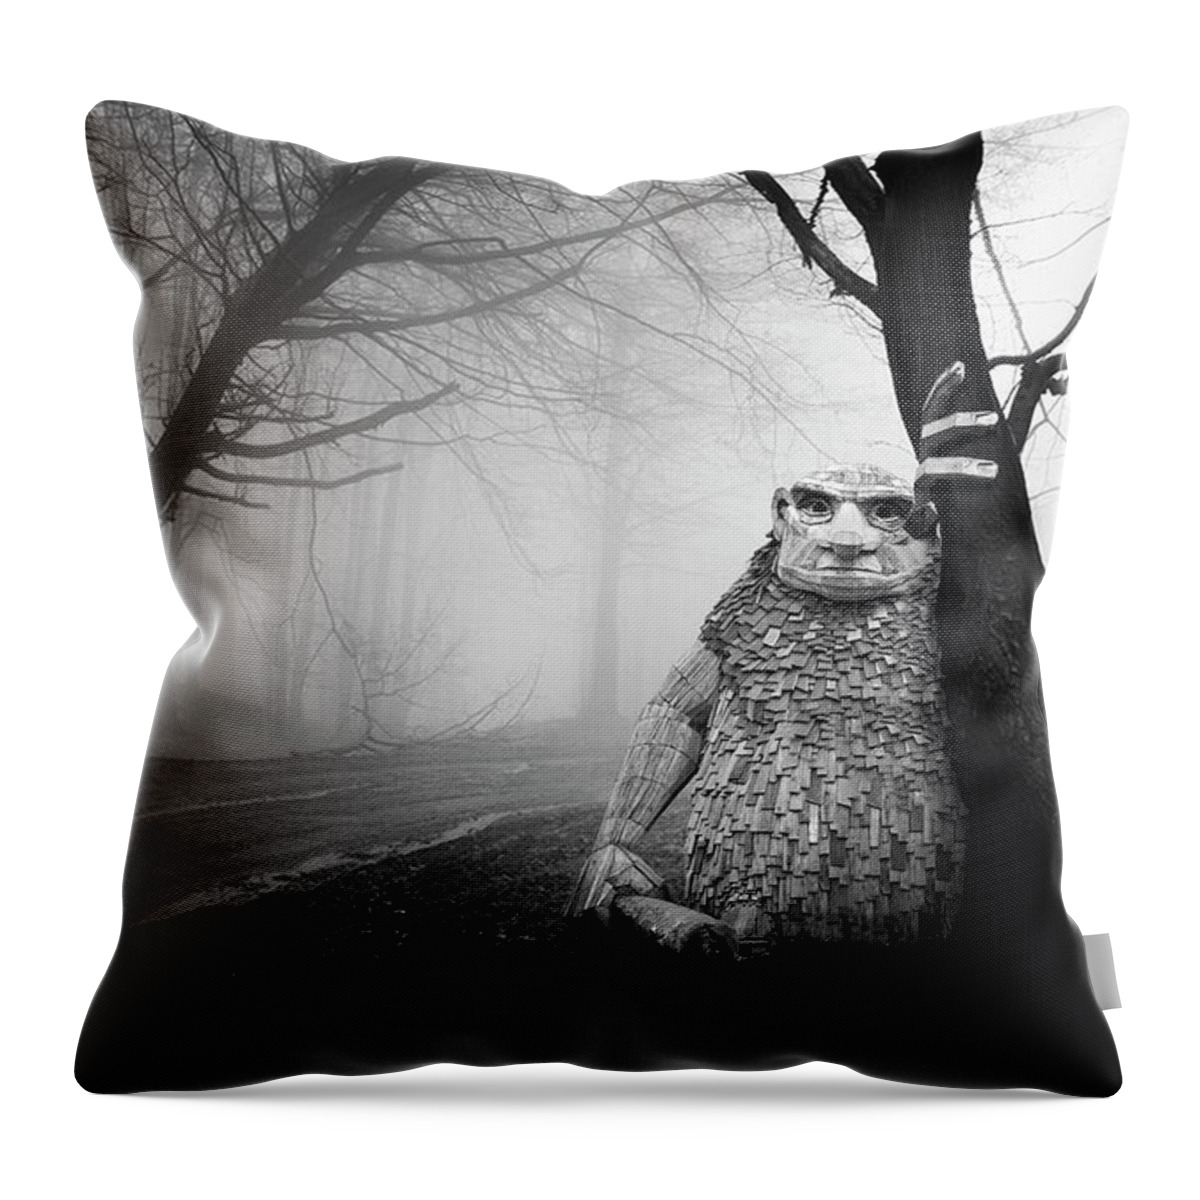 Troll Throw Pillow featuring the photograph Troll #1 by Kathryn McBride